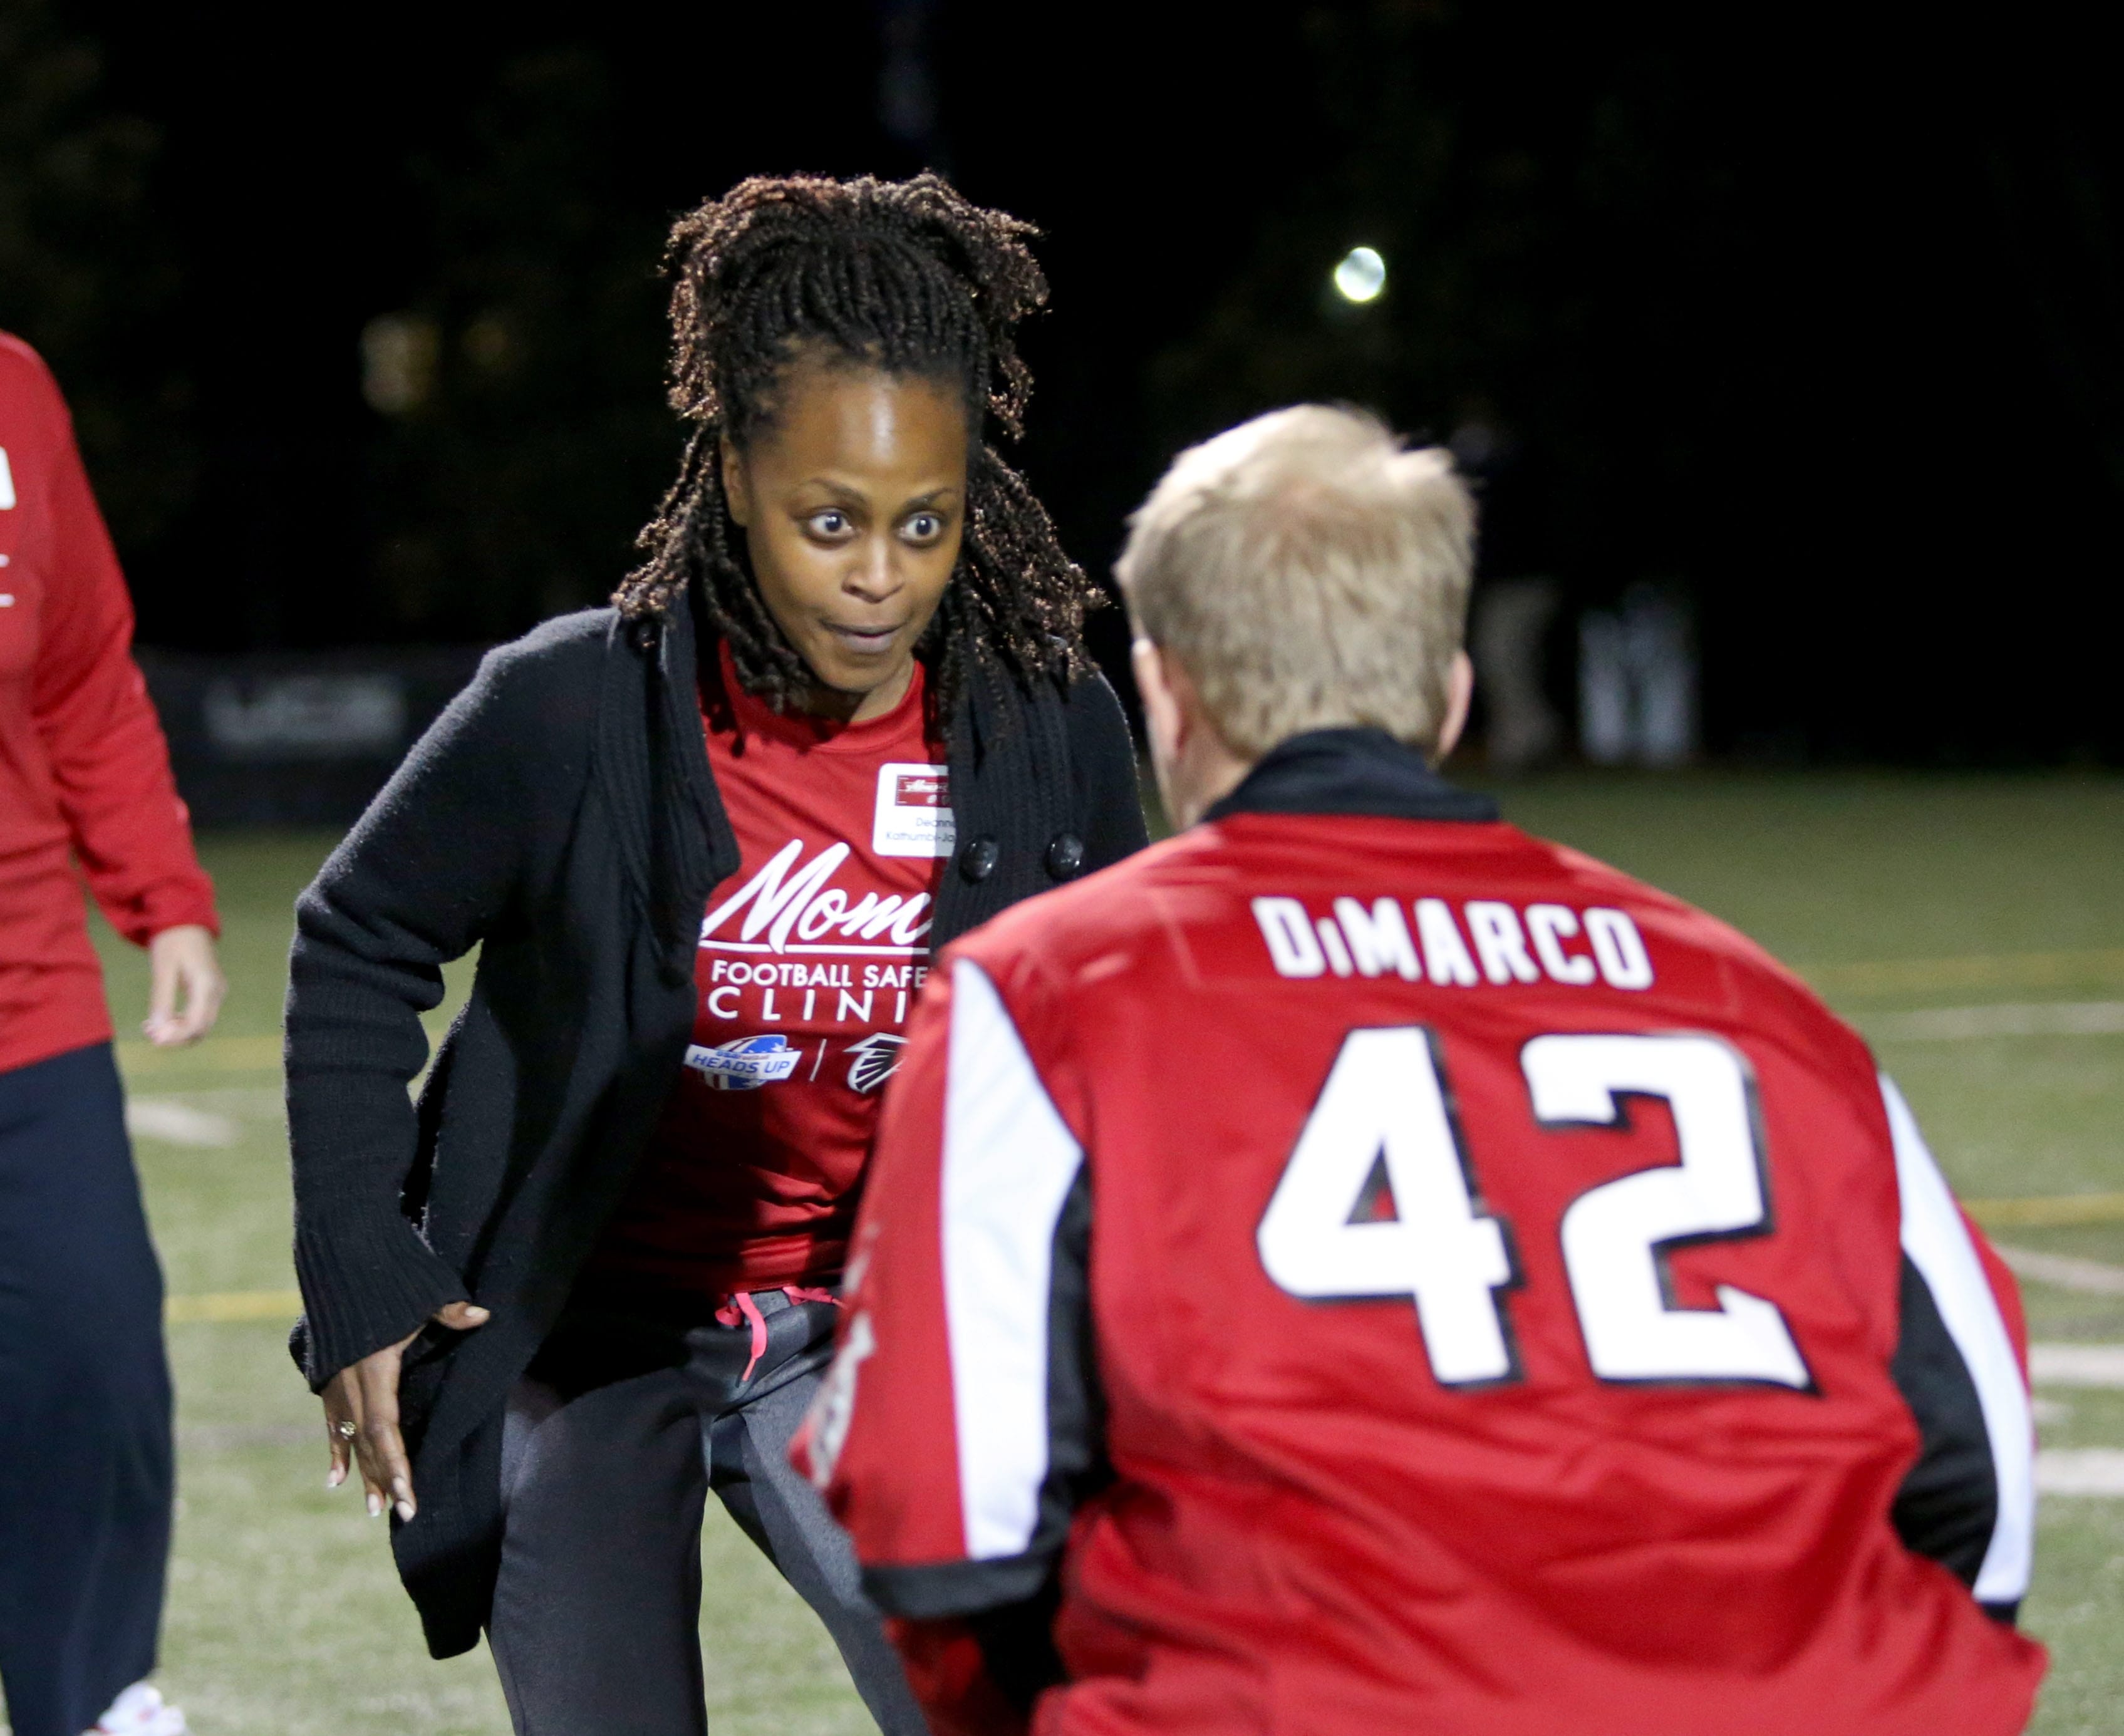 Deanna Kathumbi-Jackson was one of 176 mothers who attended a youth football safety clinic hosted by the Atlanta Falcons on Tuesday.